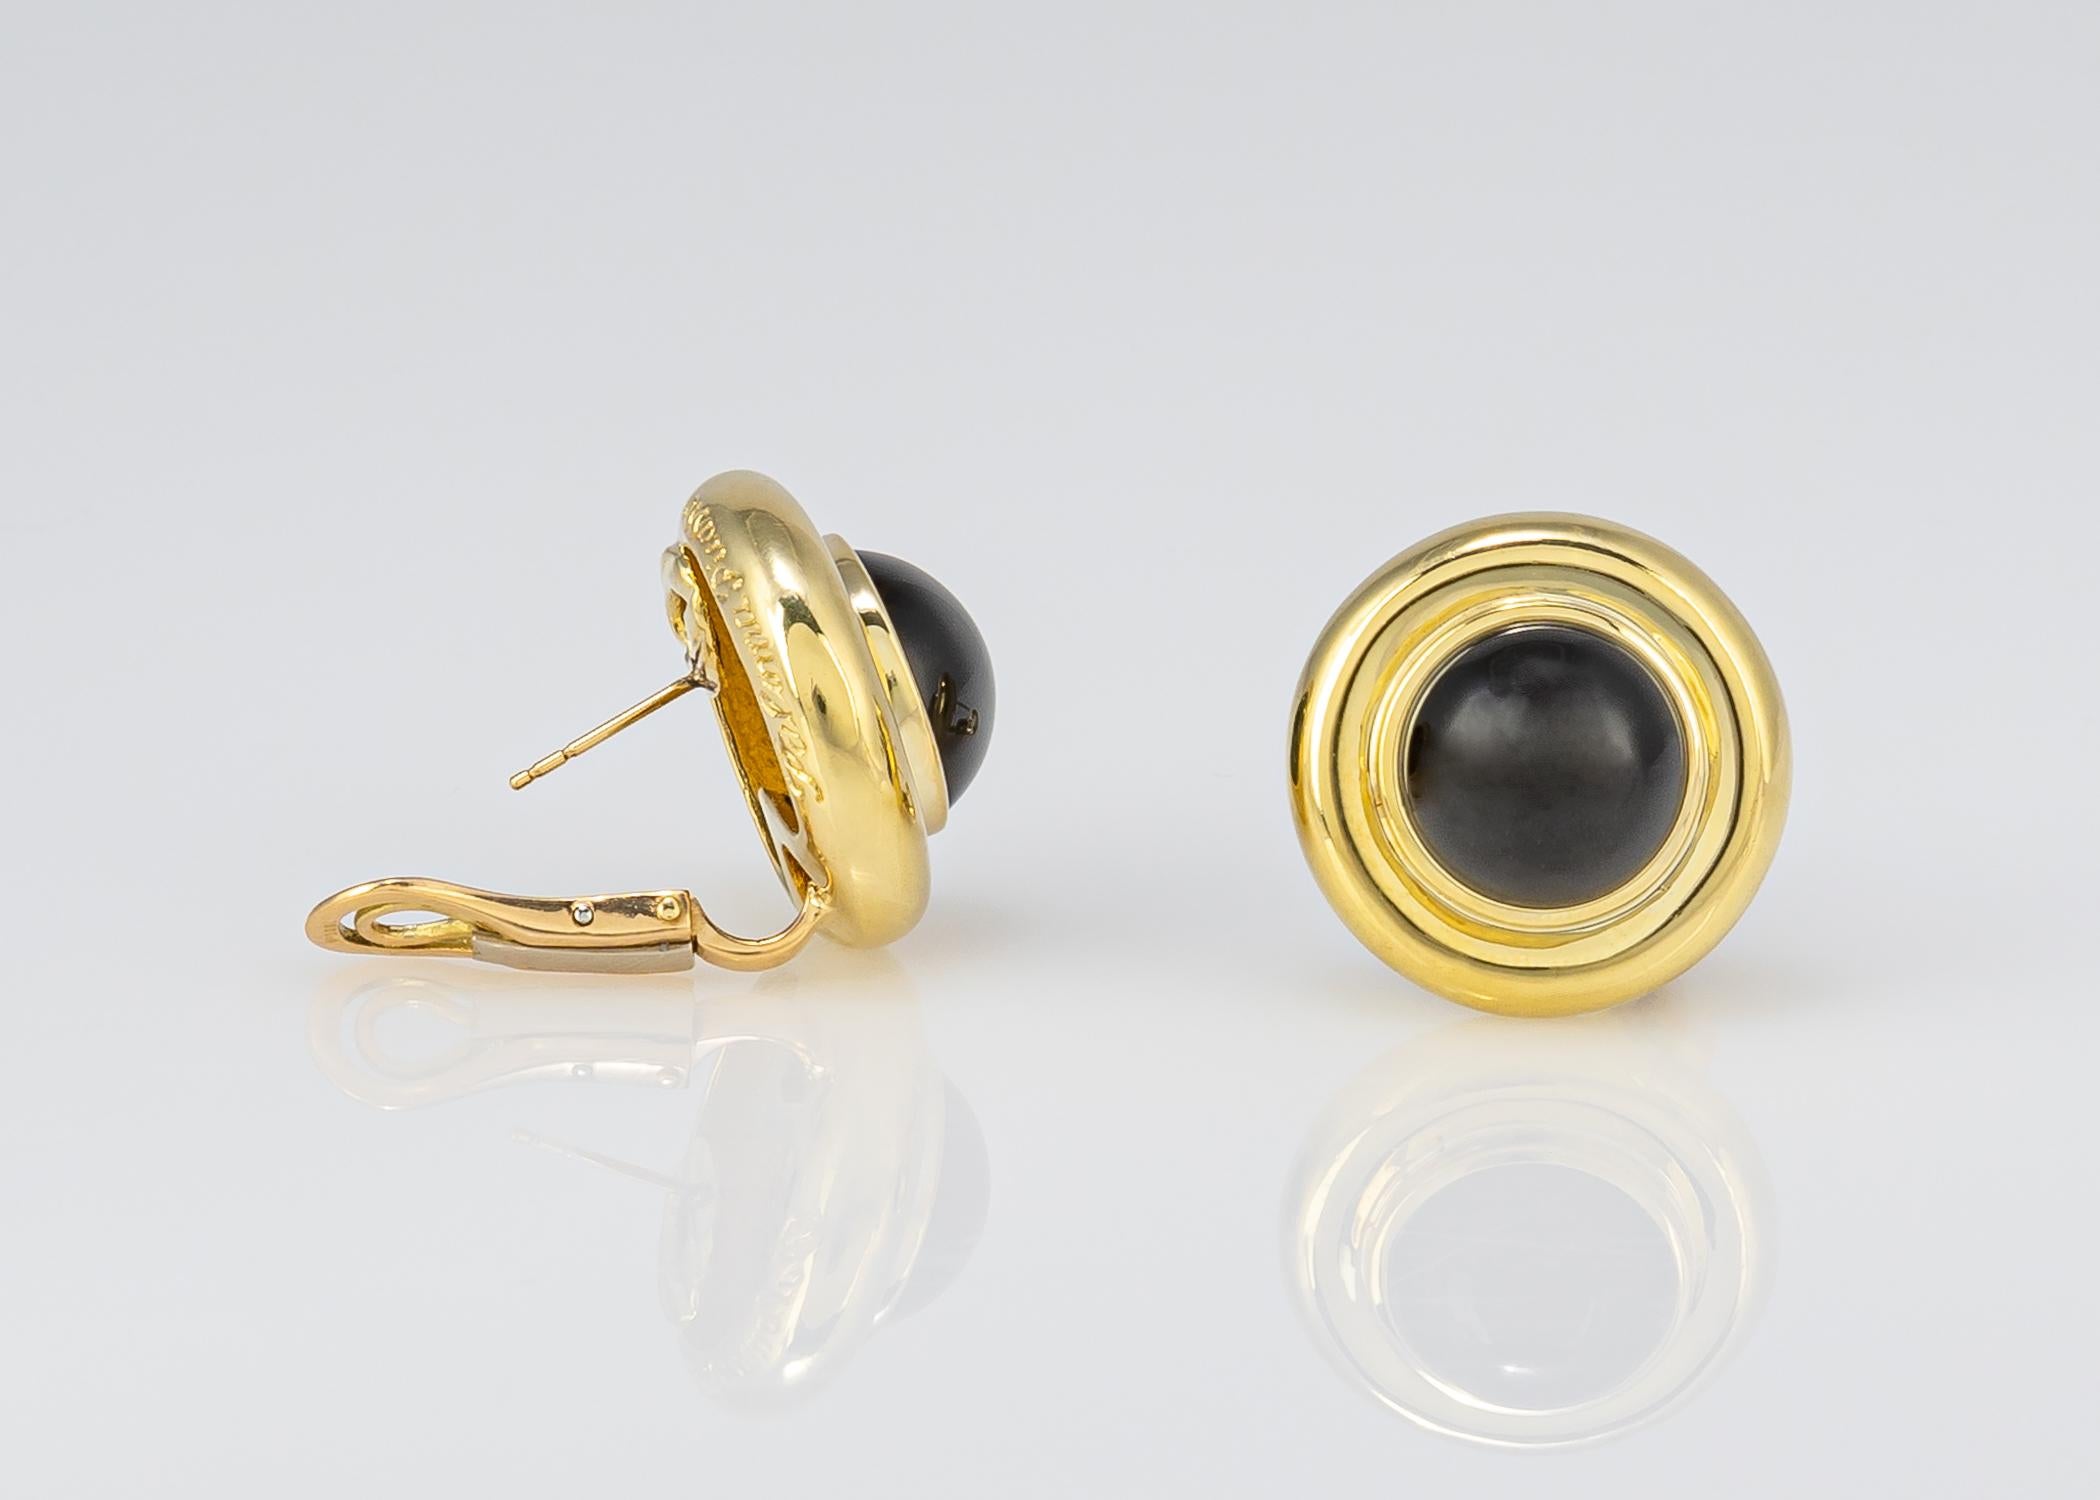 Paloma Picasso has created bold simple designs for Tiffany that are classic and collectable. Black onyx framed with a double bezel. Wearable & Chic. 15/16th of an inch.